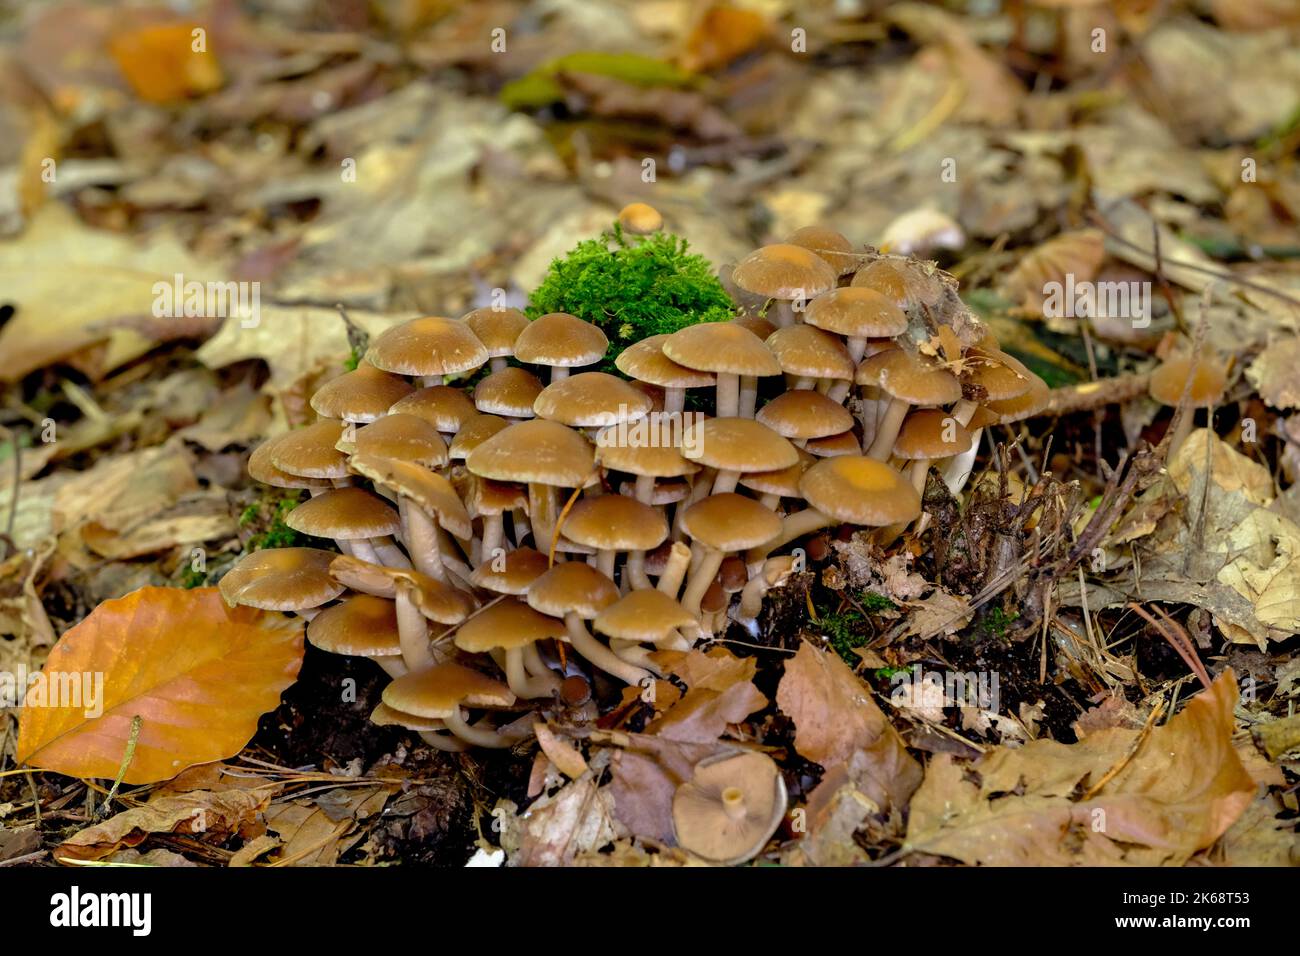 In the autumn forests in Bavaria, they can be found almost everywhere: Mushrooms in all colors. Stock Photo